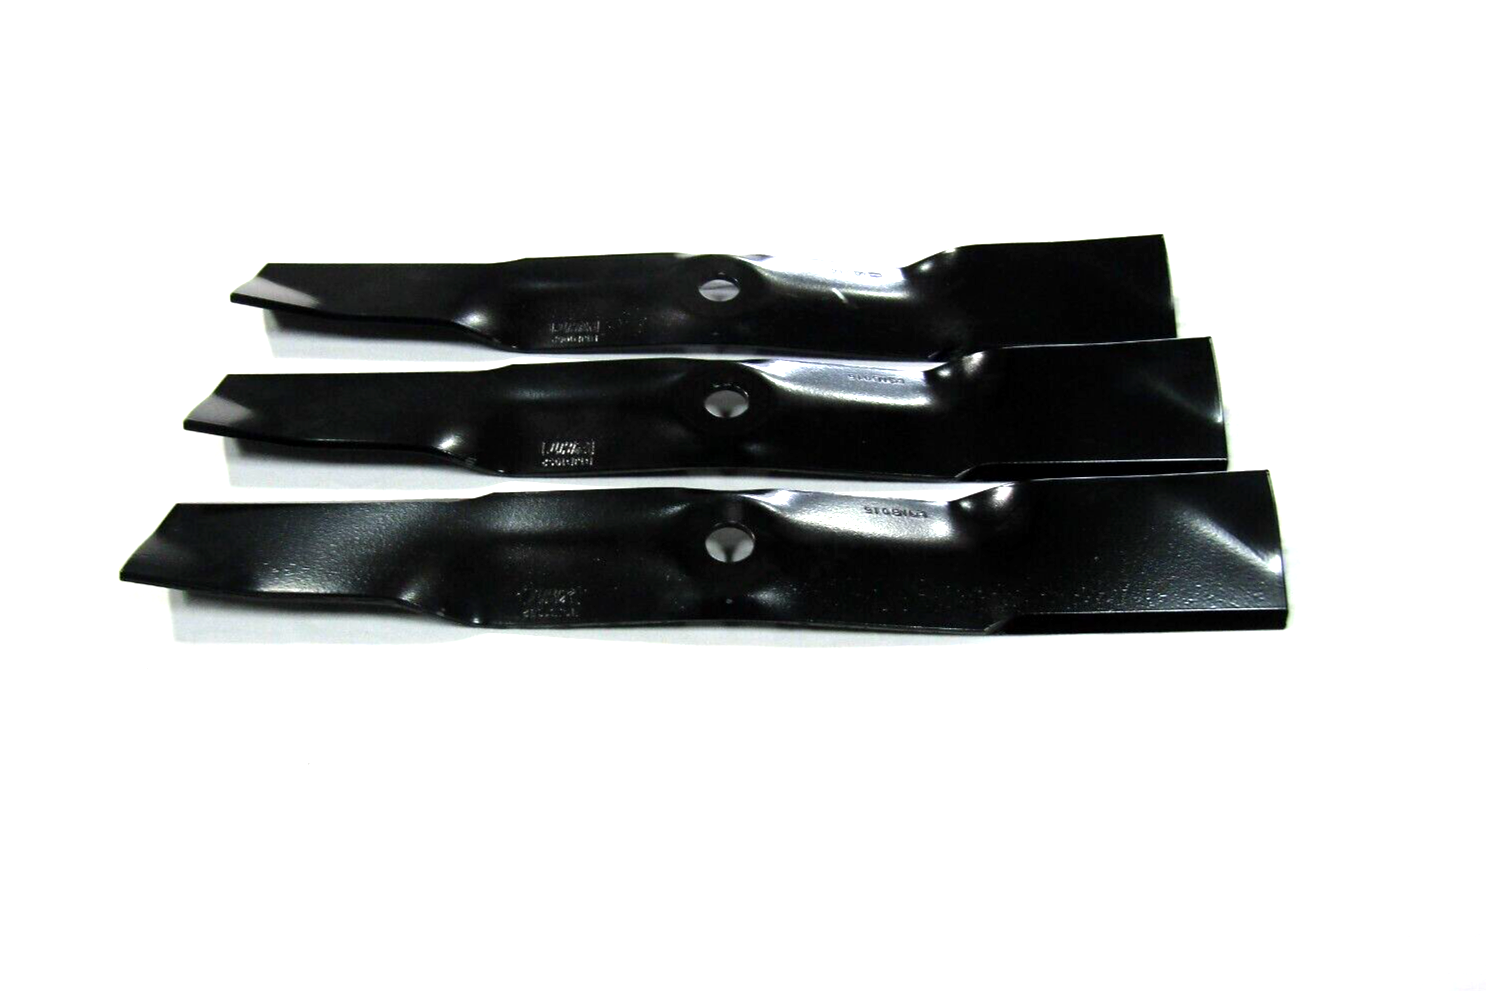 3 USA blades compatible with JOHN DEERE M143520 M145516 ON 54" C DECK MOWERS